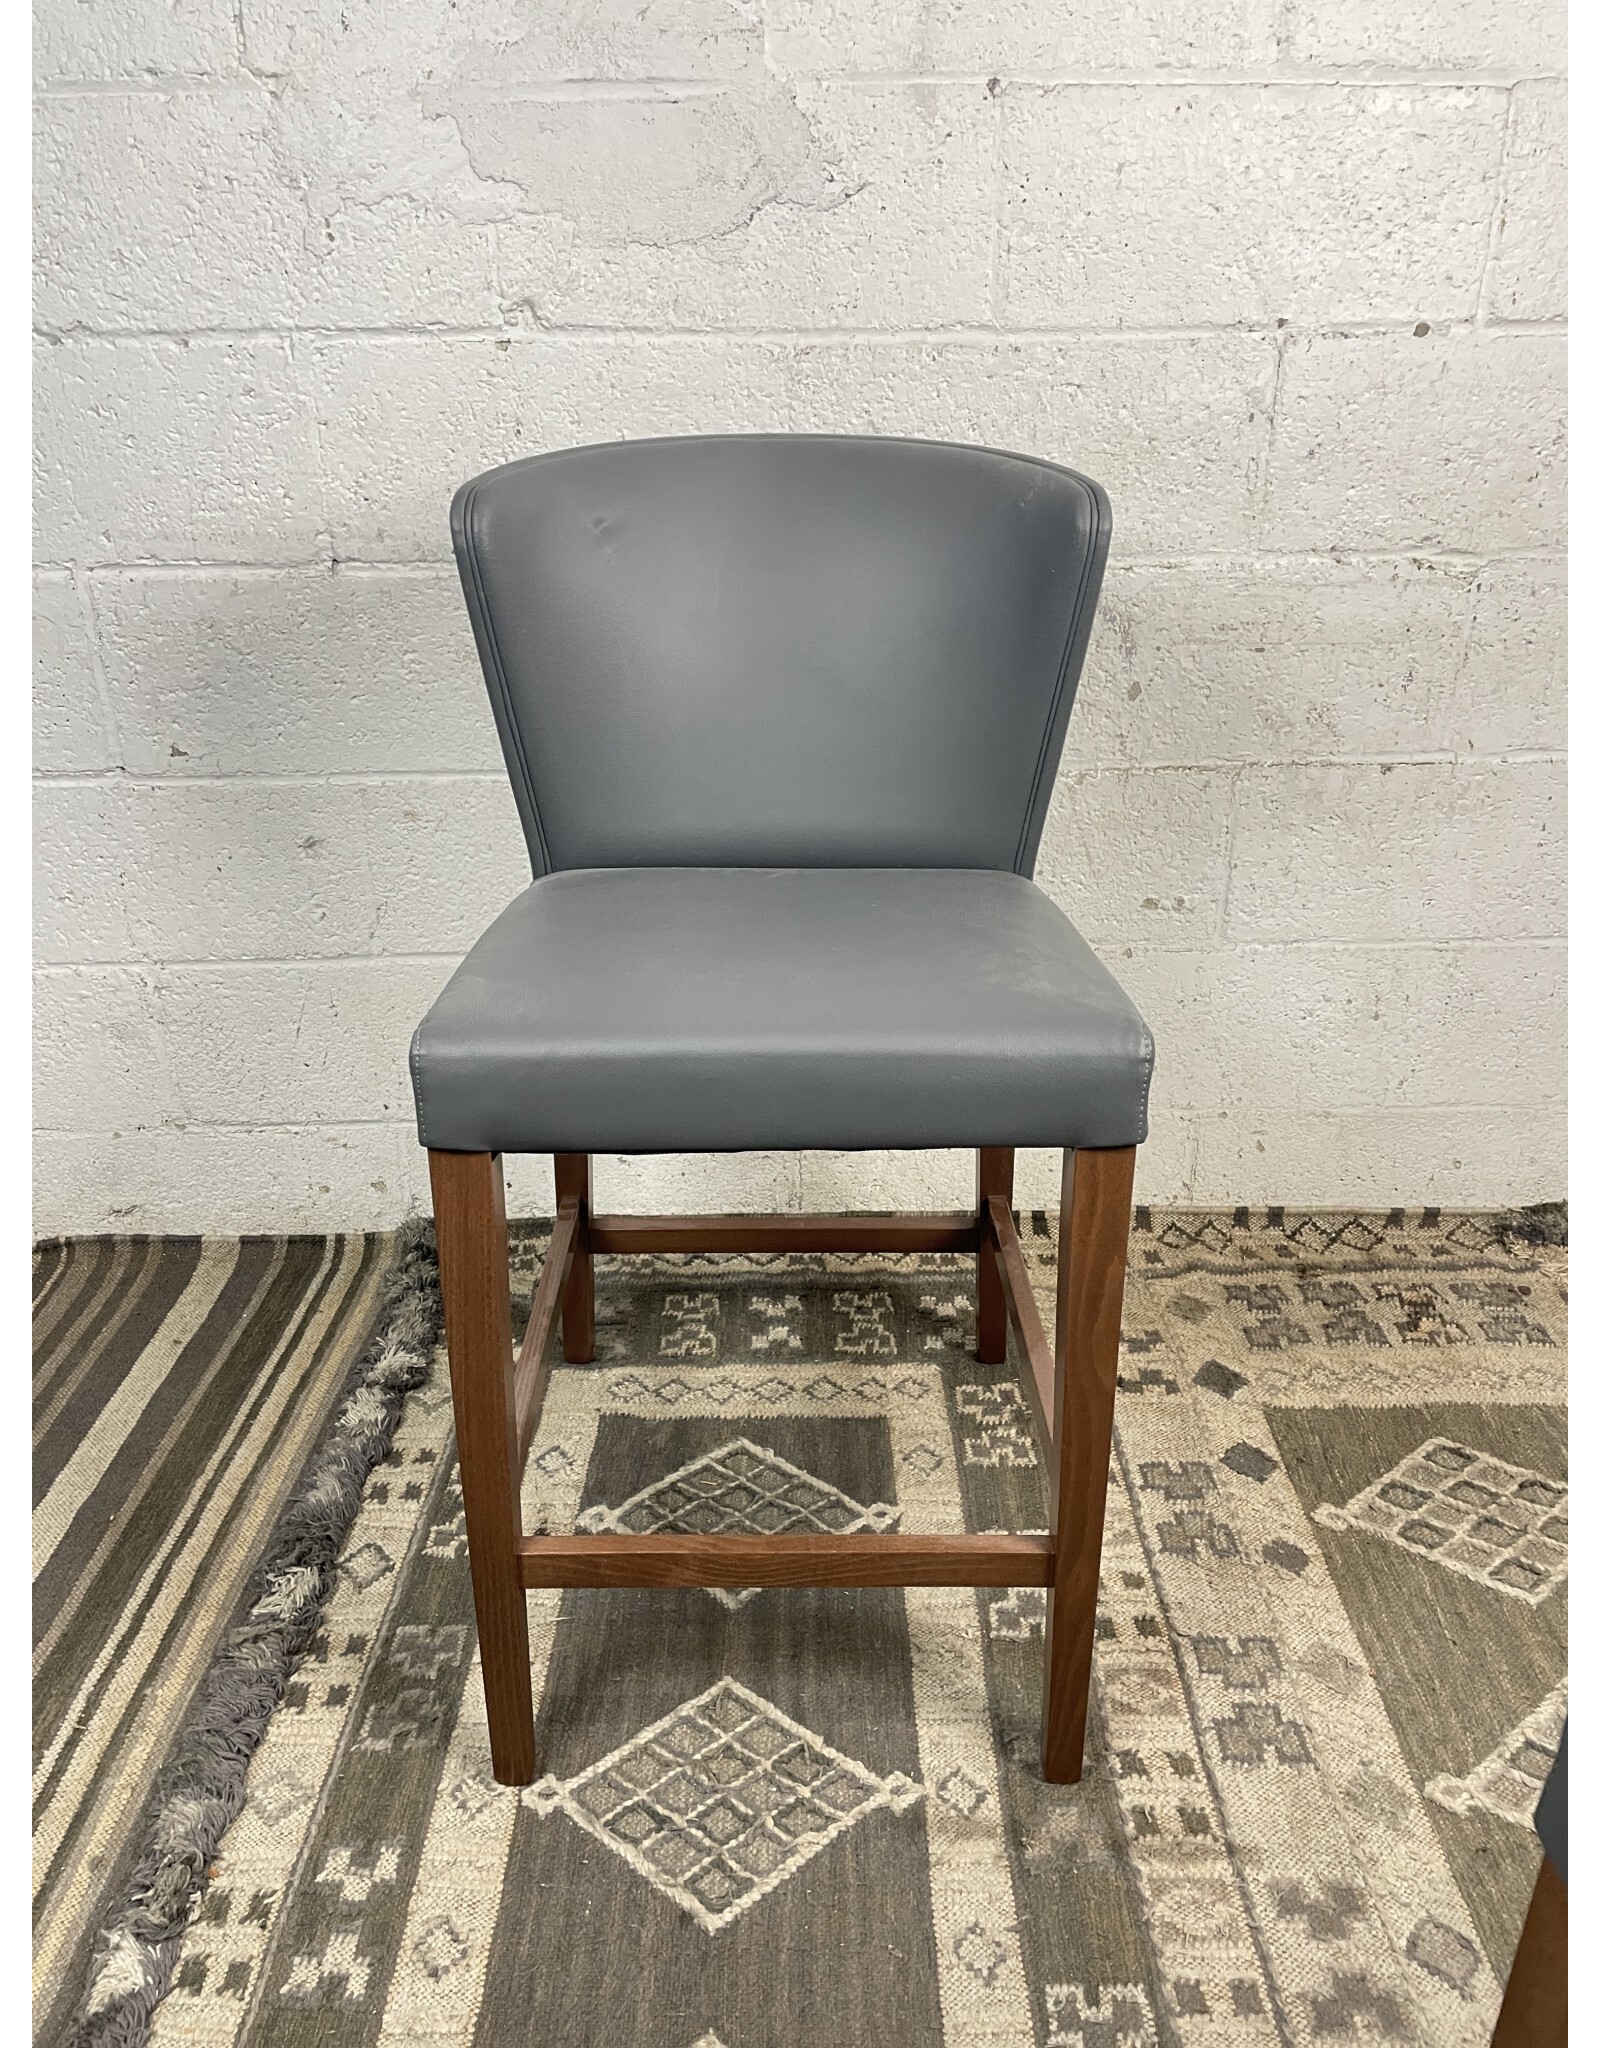 Crate & Barrel Curran Dining Chair